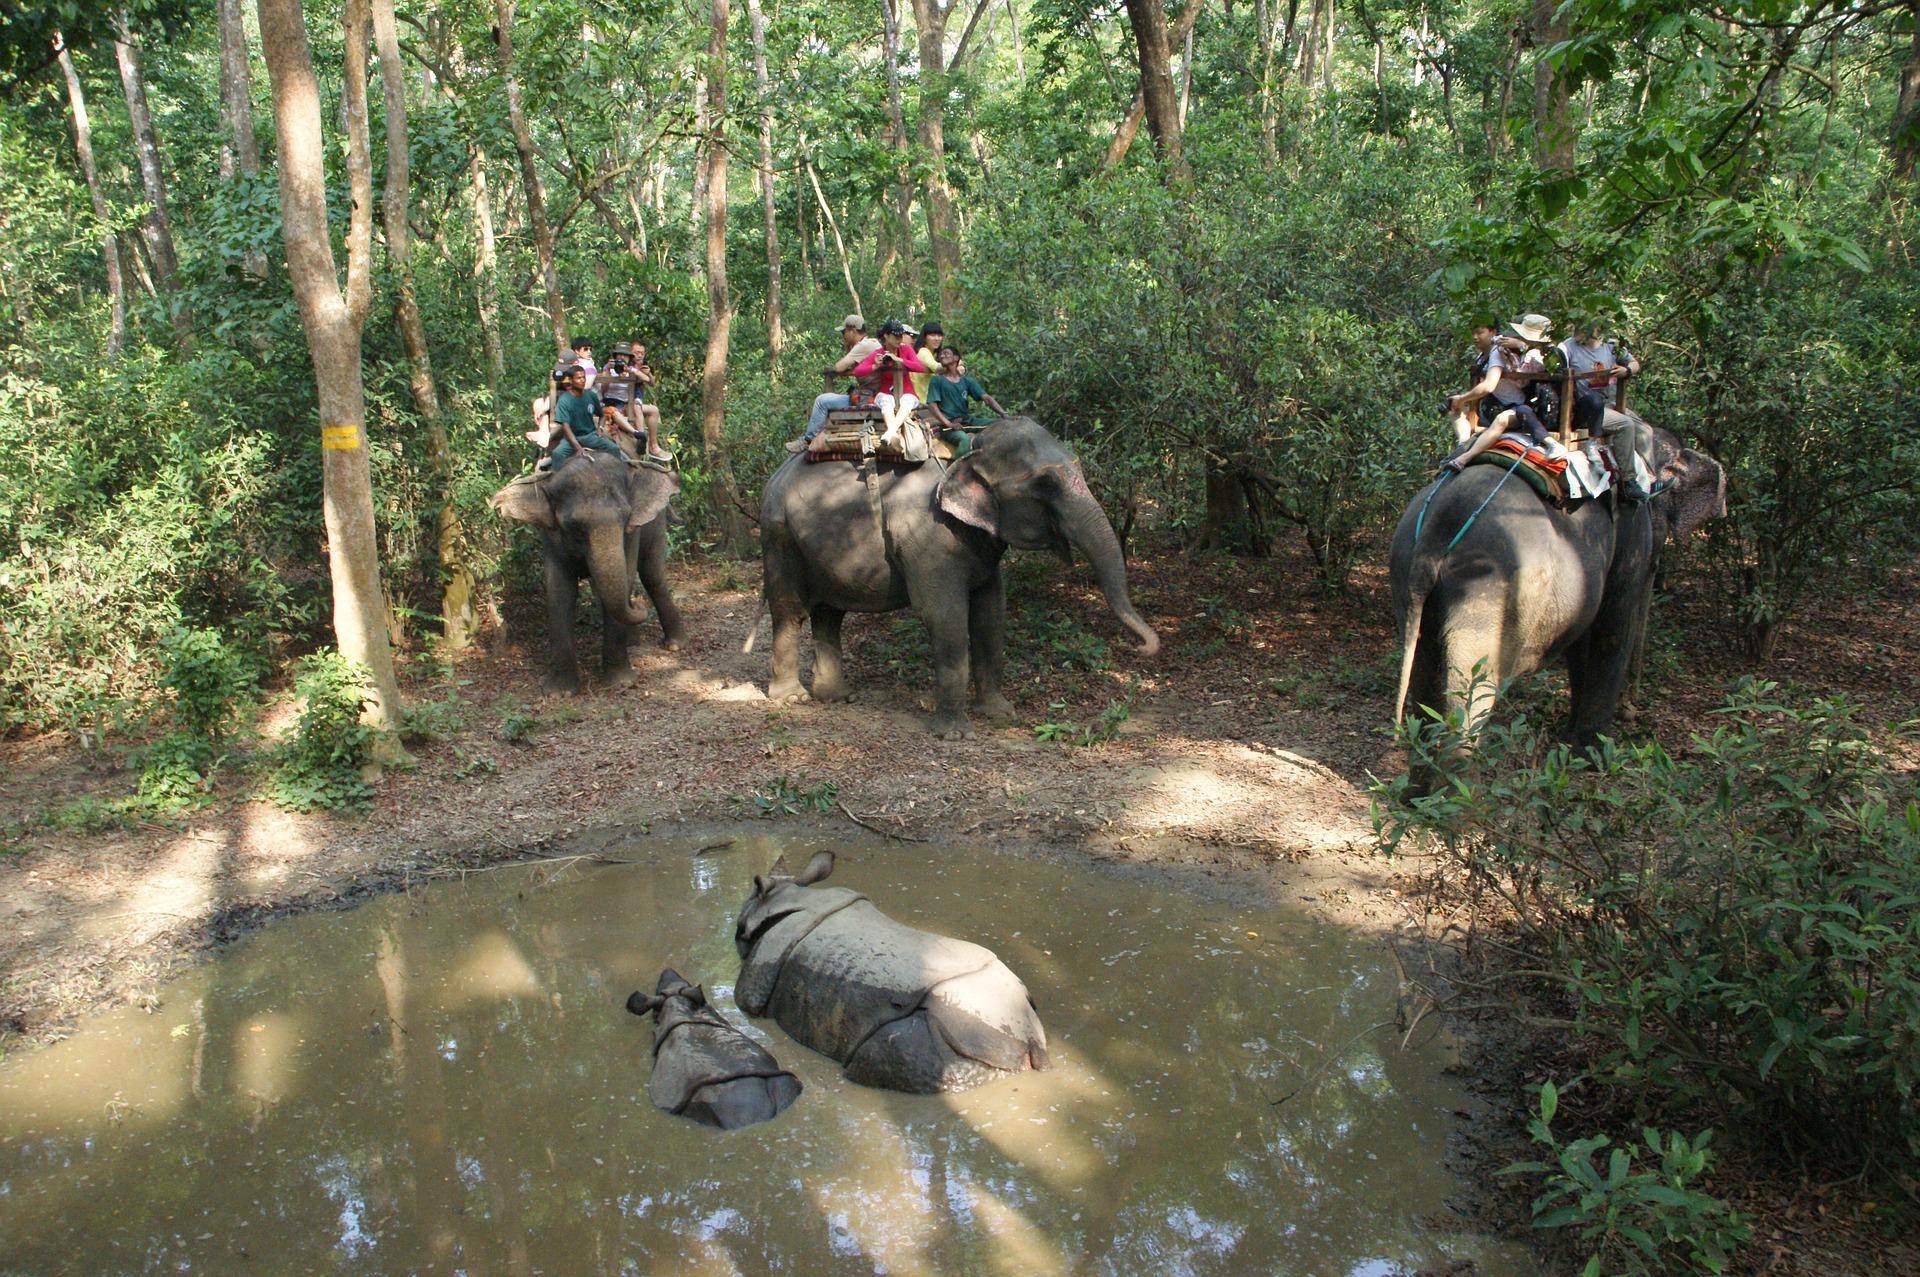 Chitwan cultural and historical sightseeing